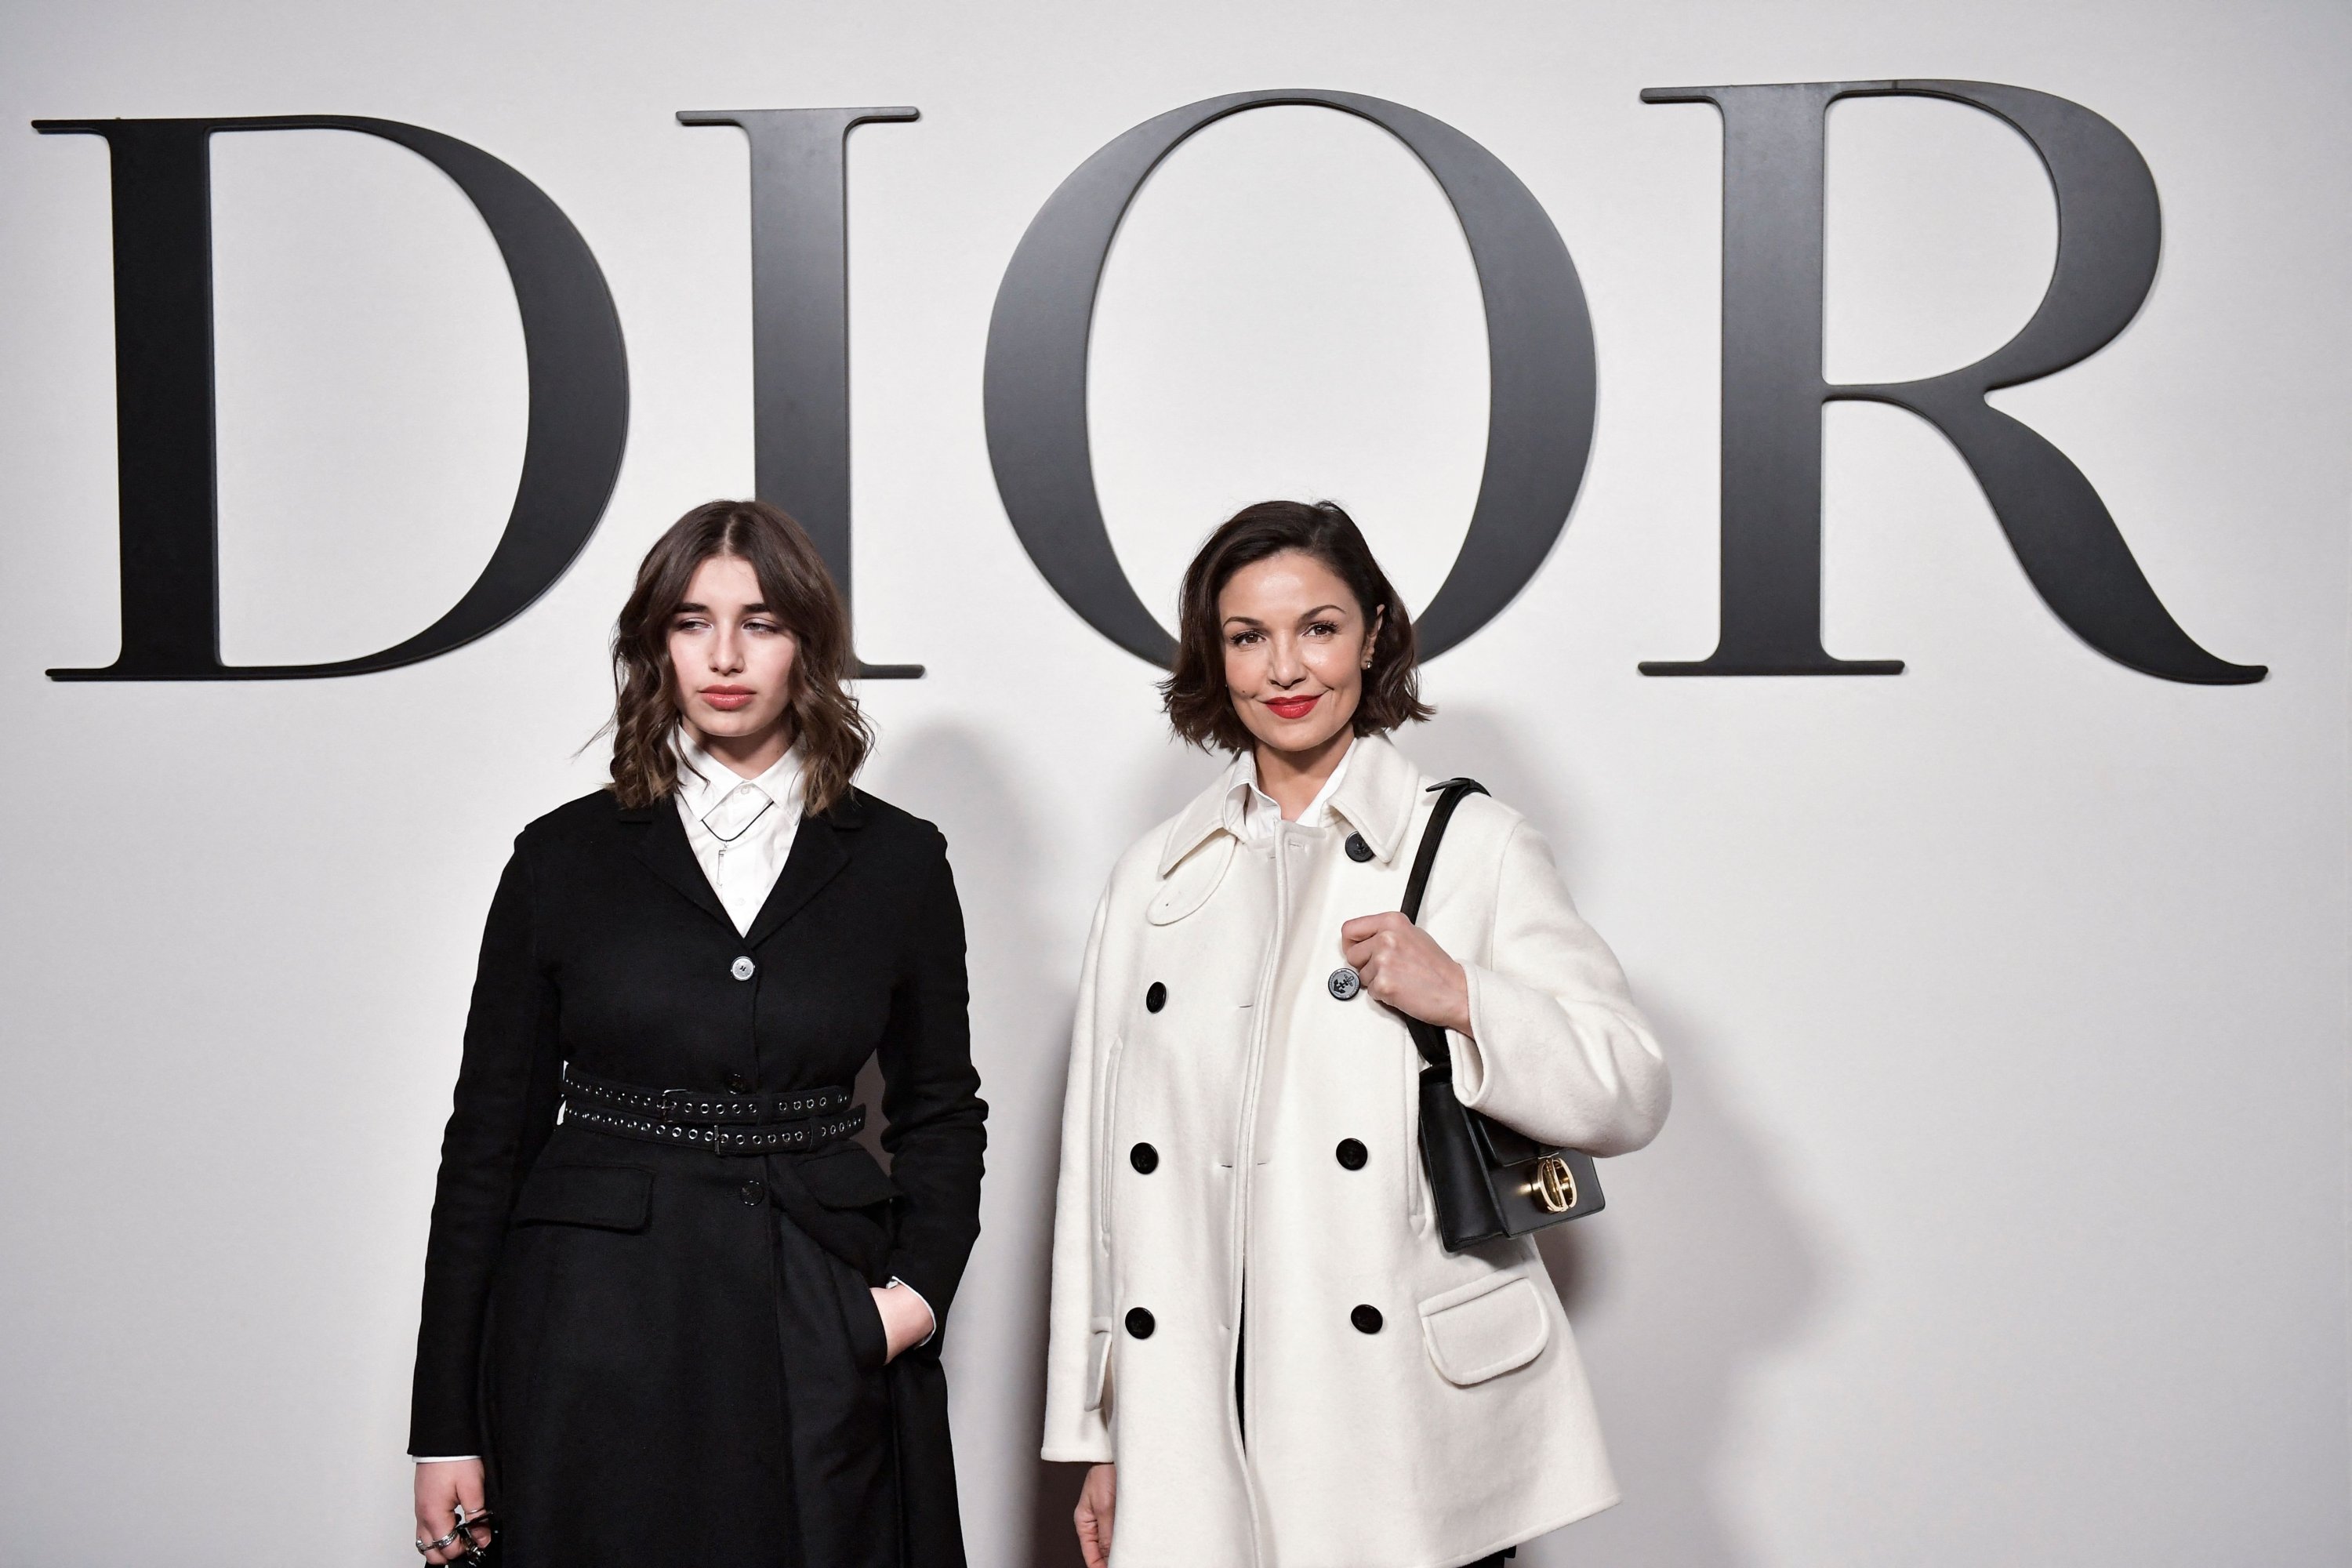 Paris Fashion Week is In Full Swing With the Dior Fall 2020 Show